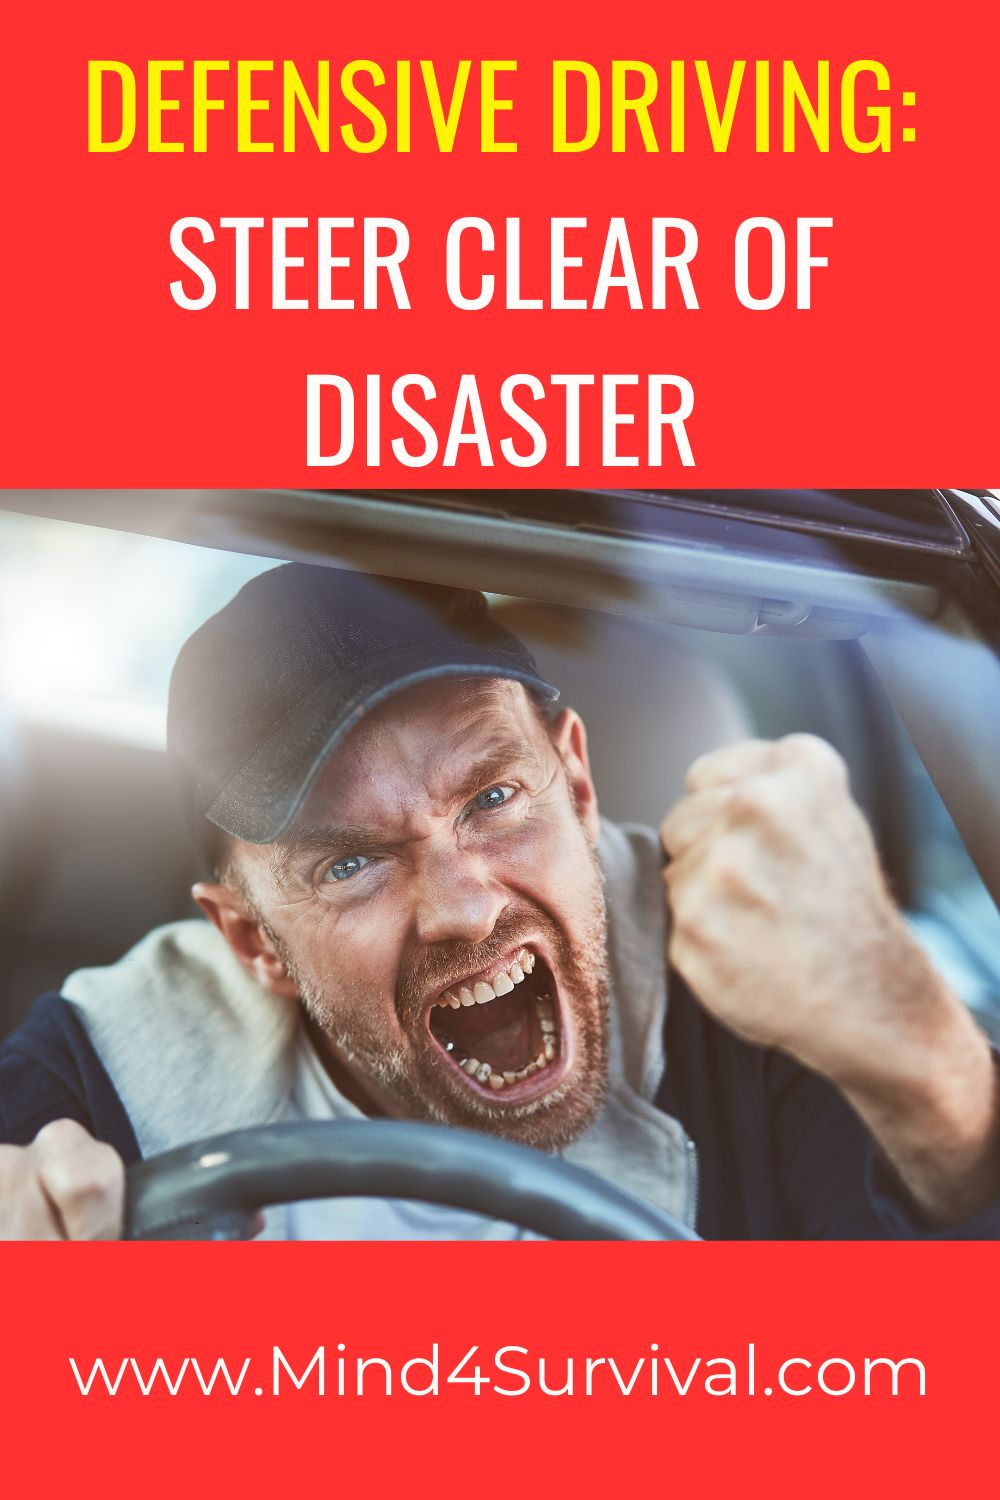 Defensive Driving: Steer Clear of Disaster